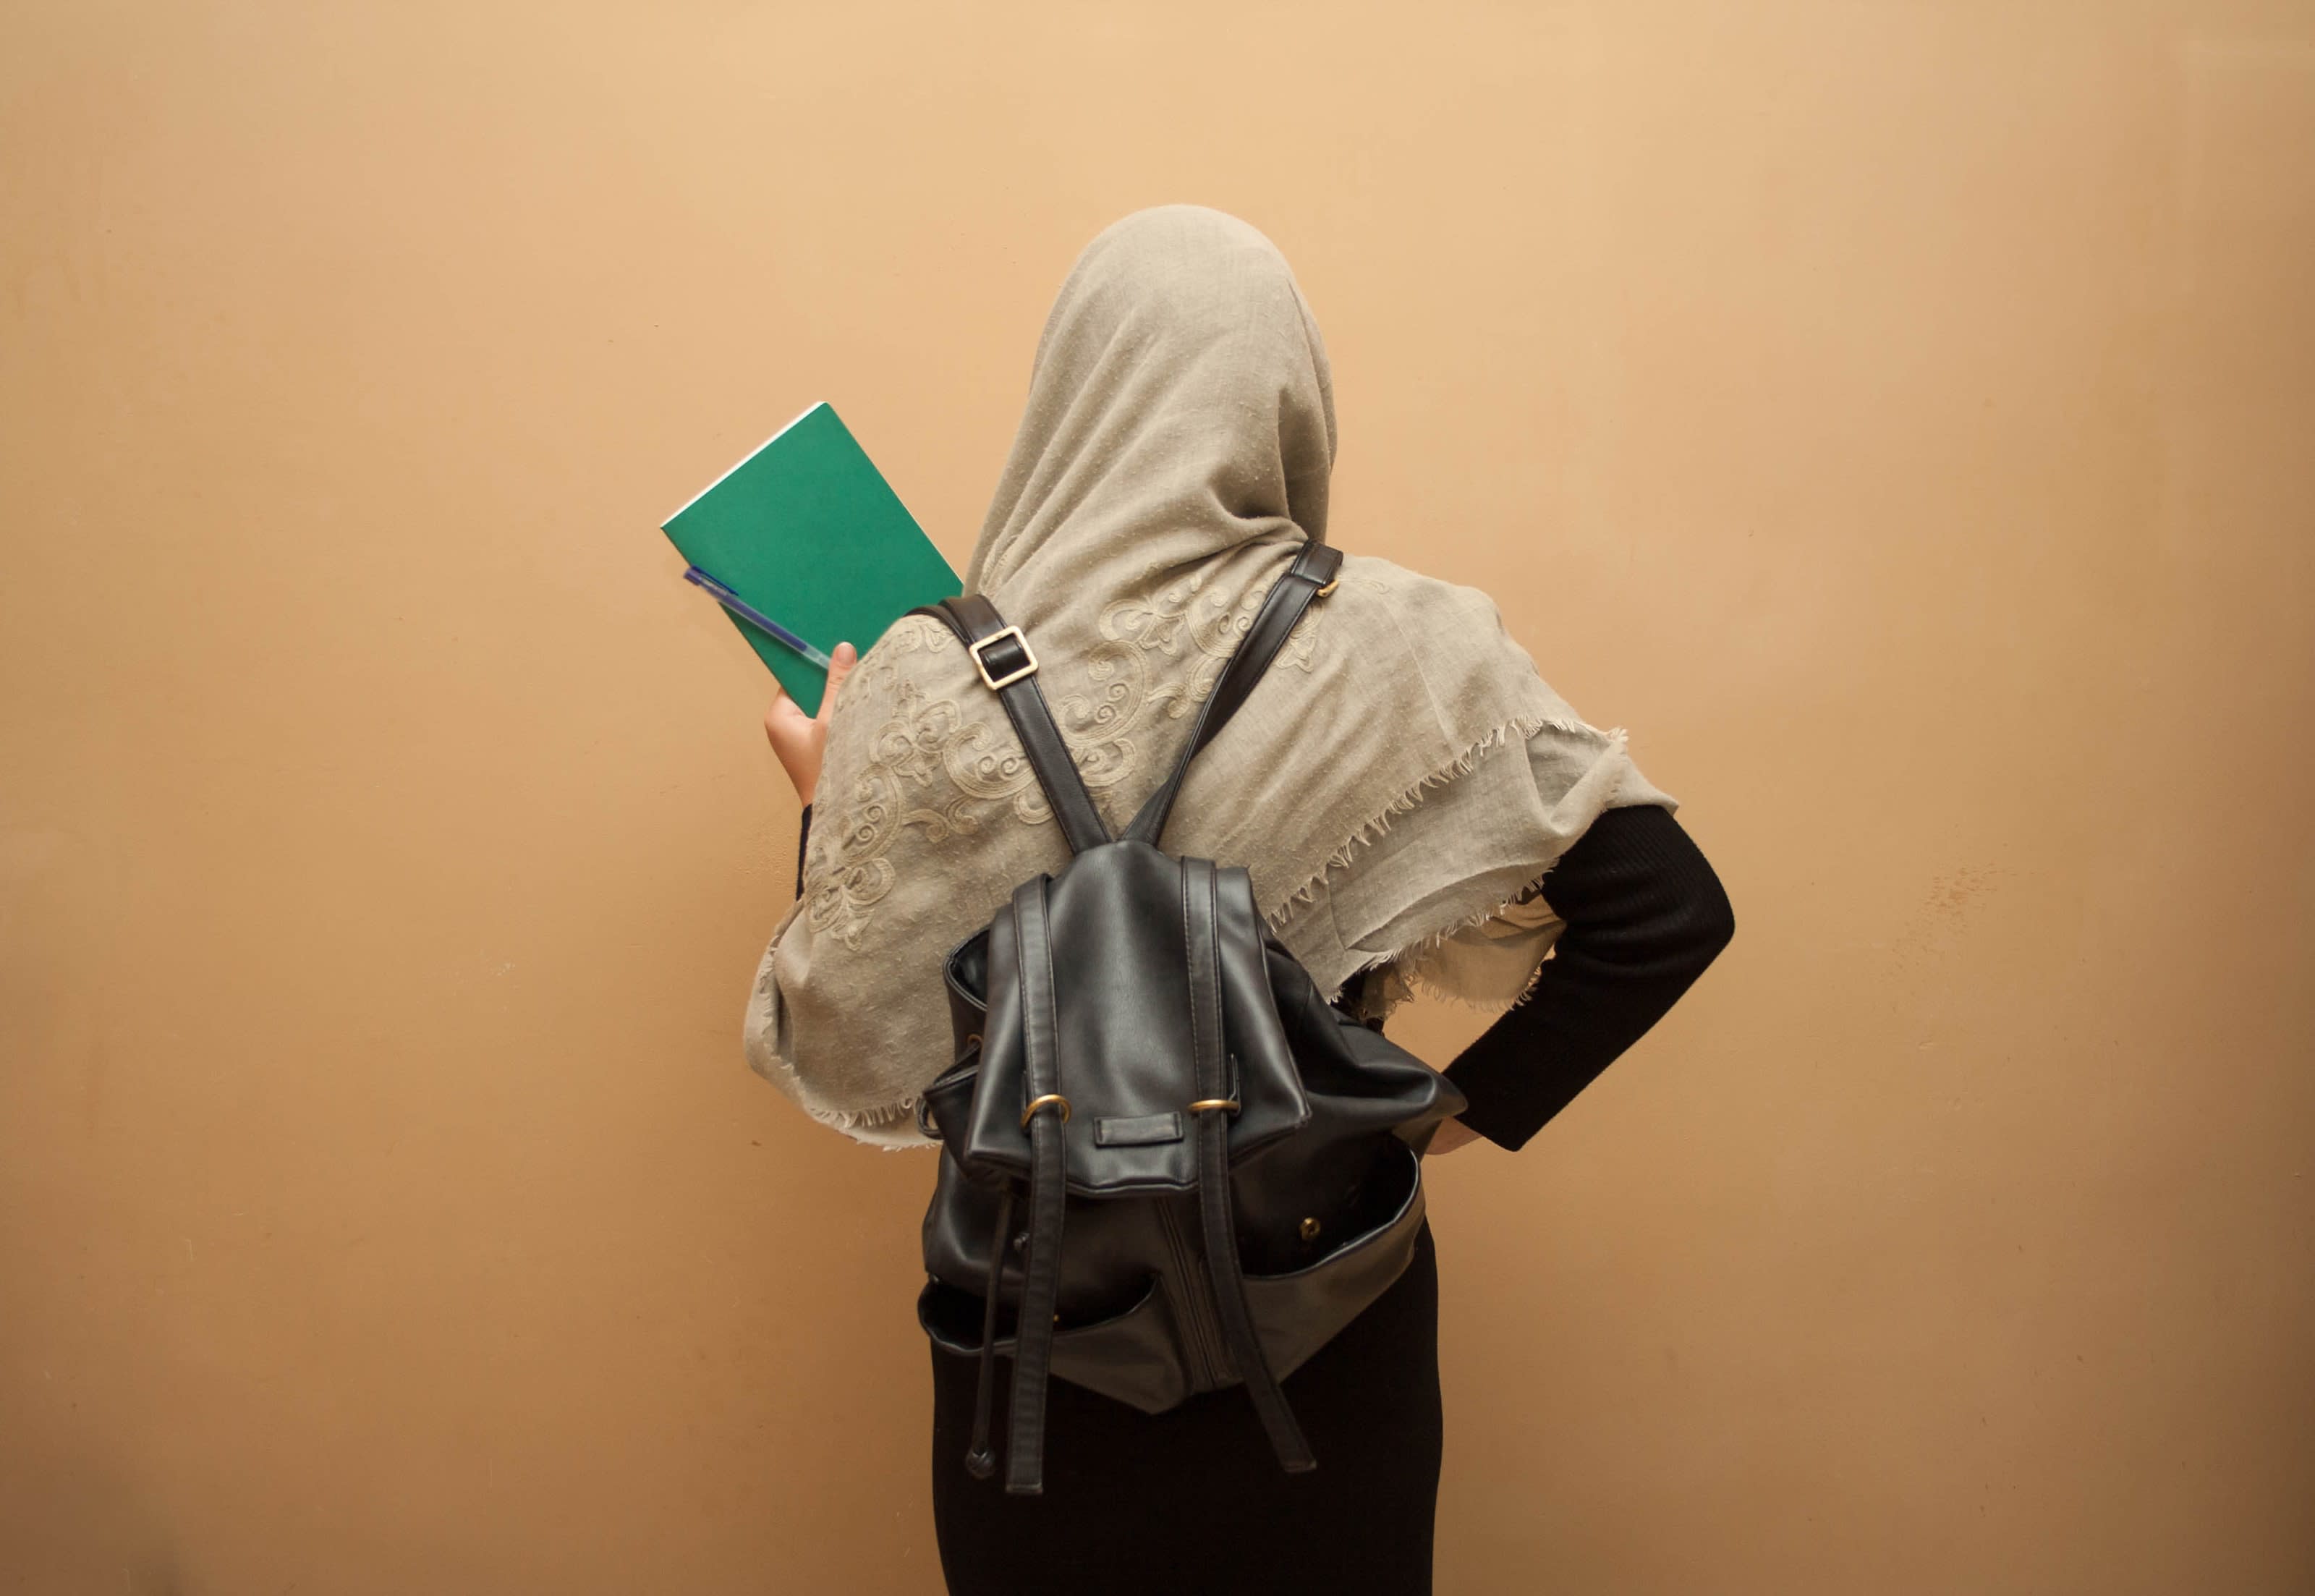 A Muslim schoolgirl wearing a backpack and holding a book, facing away from the camera